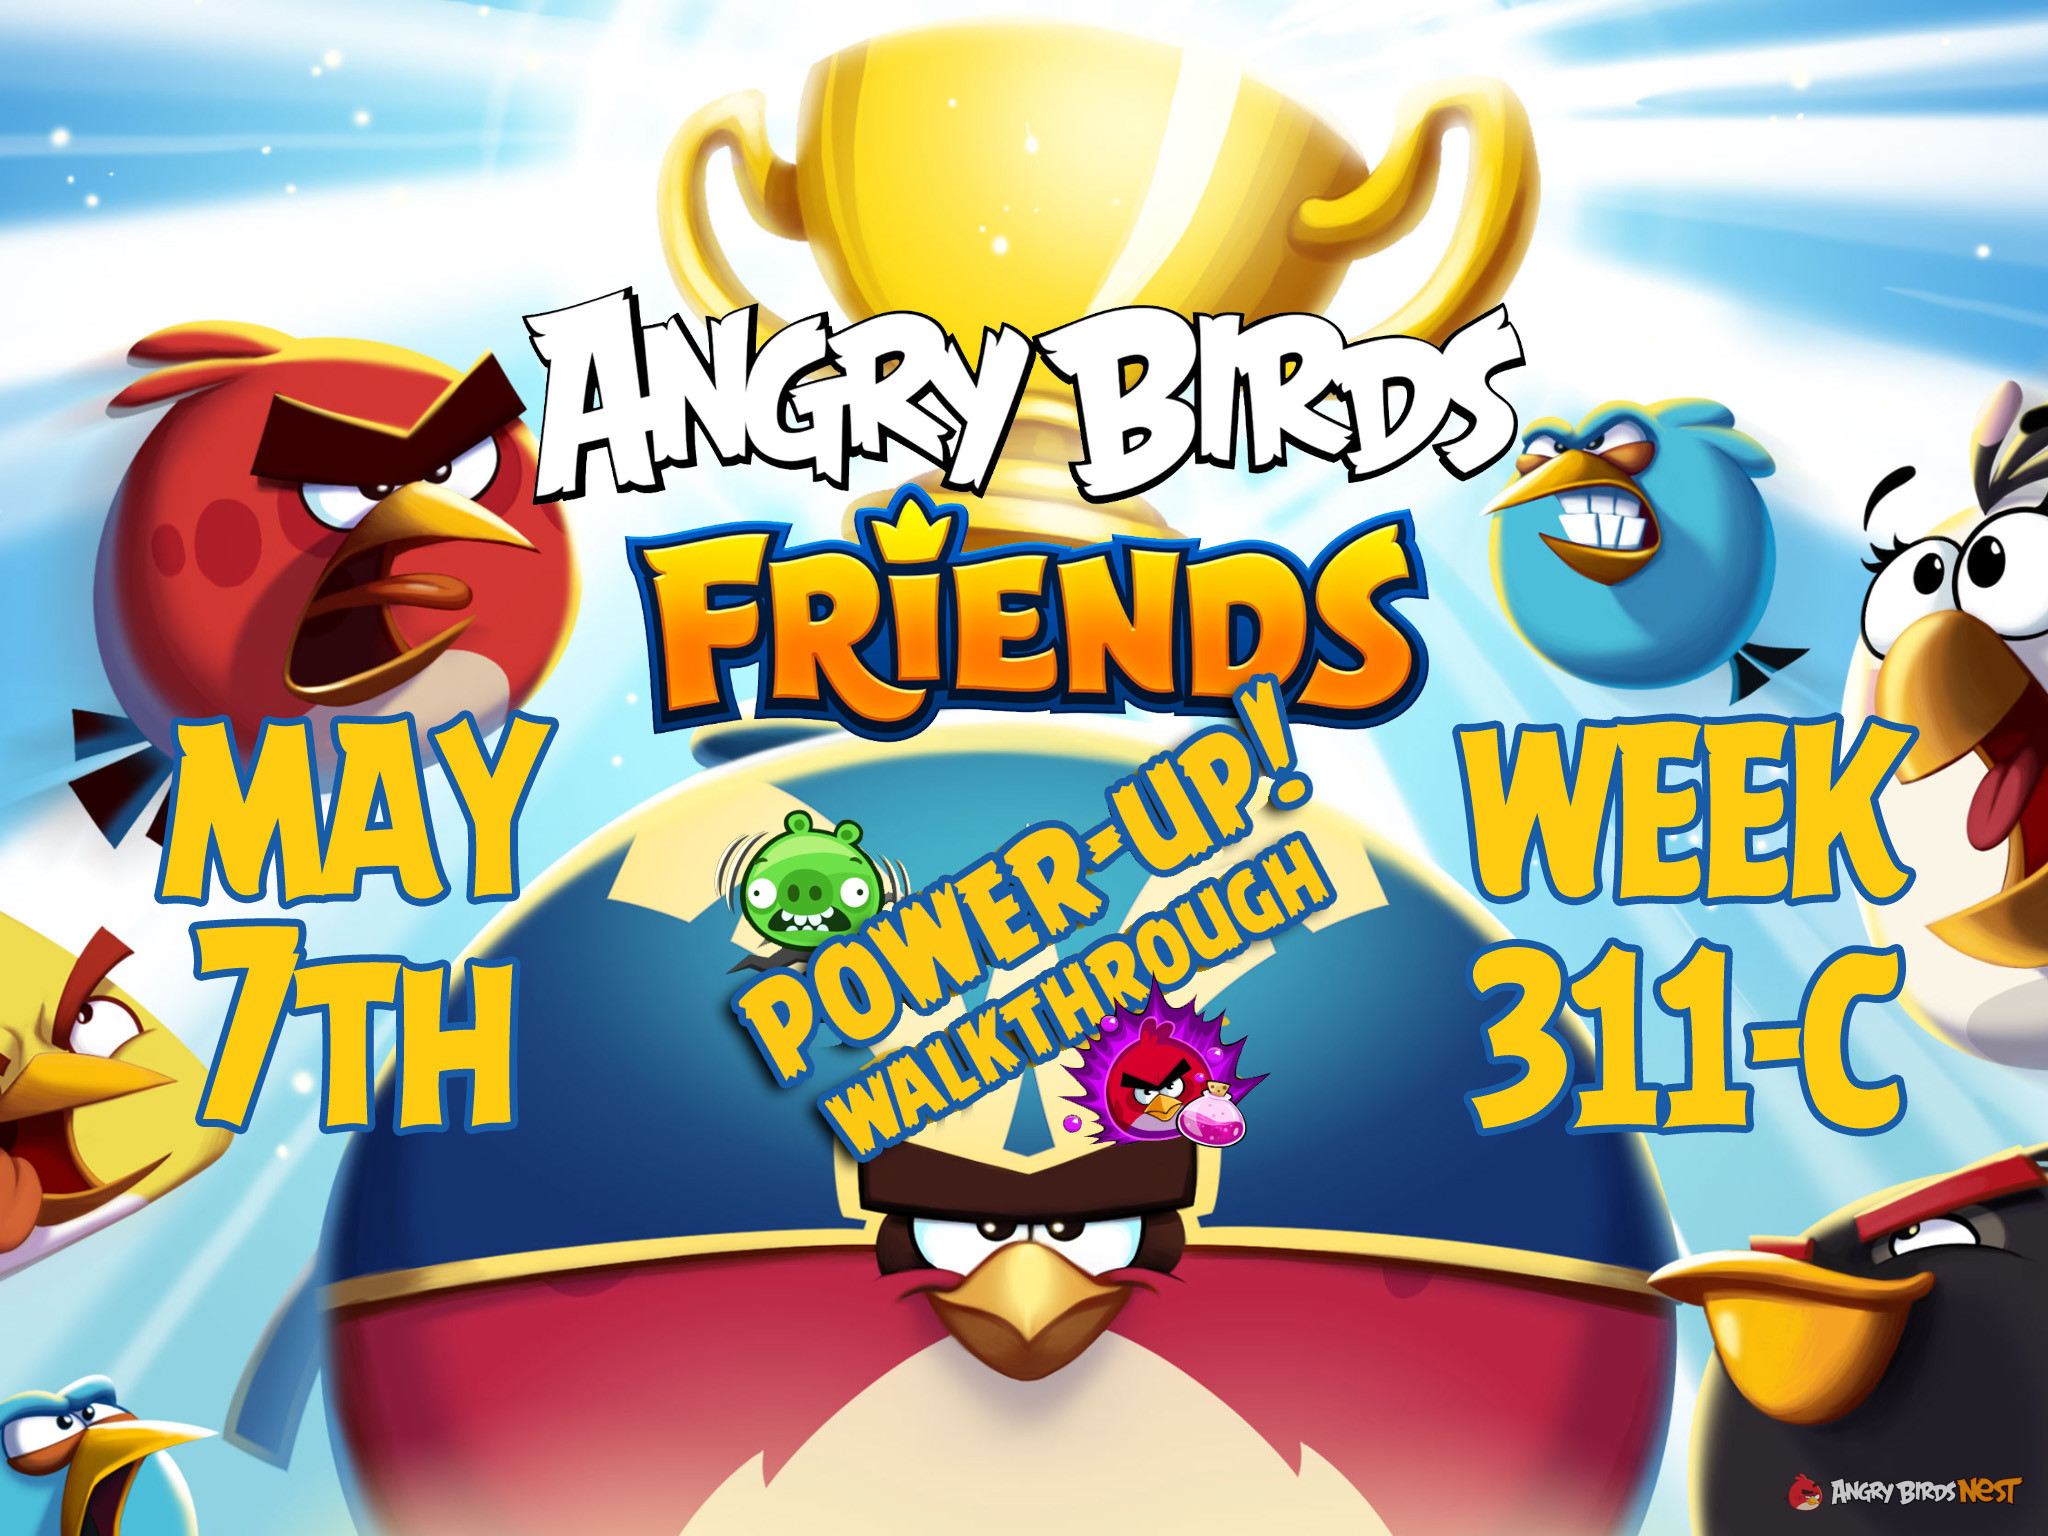 Angry Birds Friends Tournament Week 311-C Feature Image PU